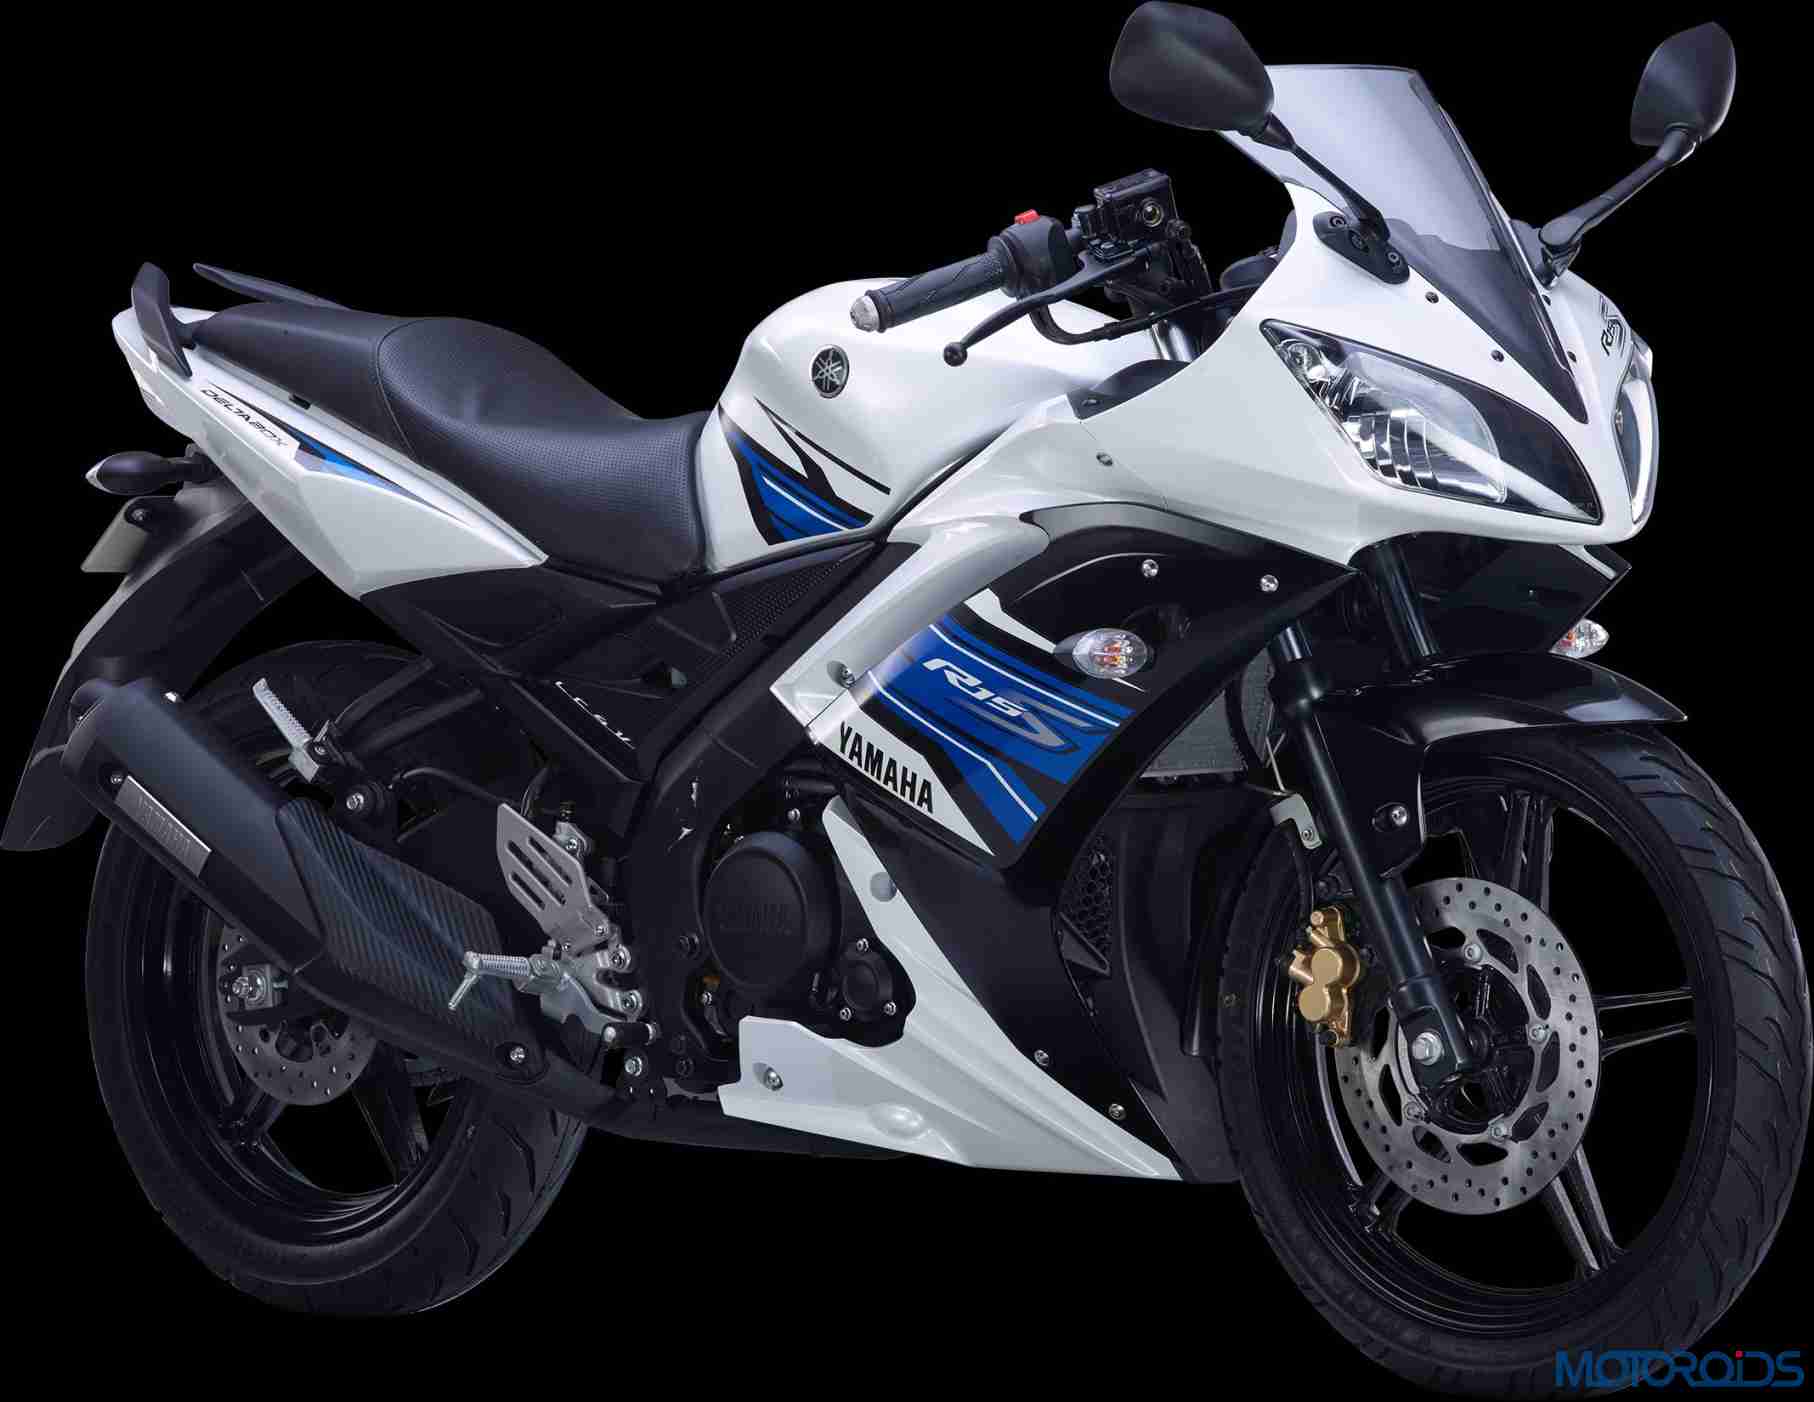 Yamaha YZF-R15 S launched; priced at INR 1.14 lakh | Motoroids